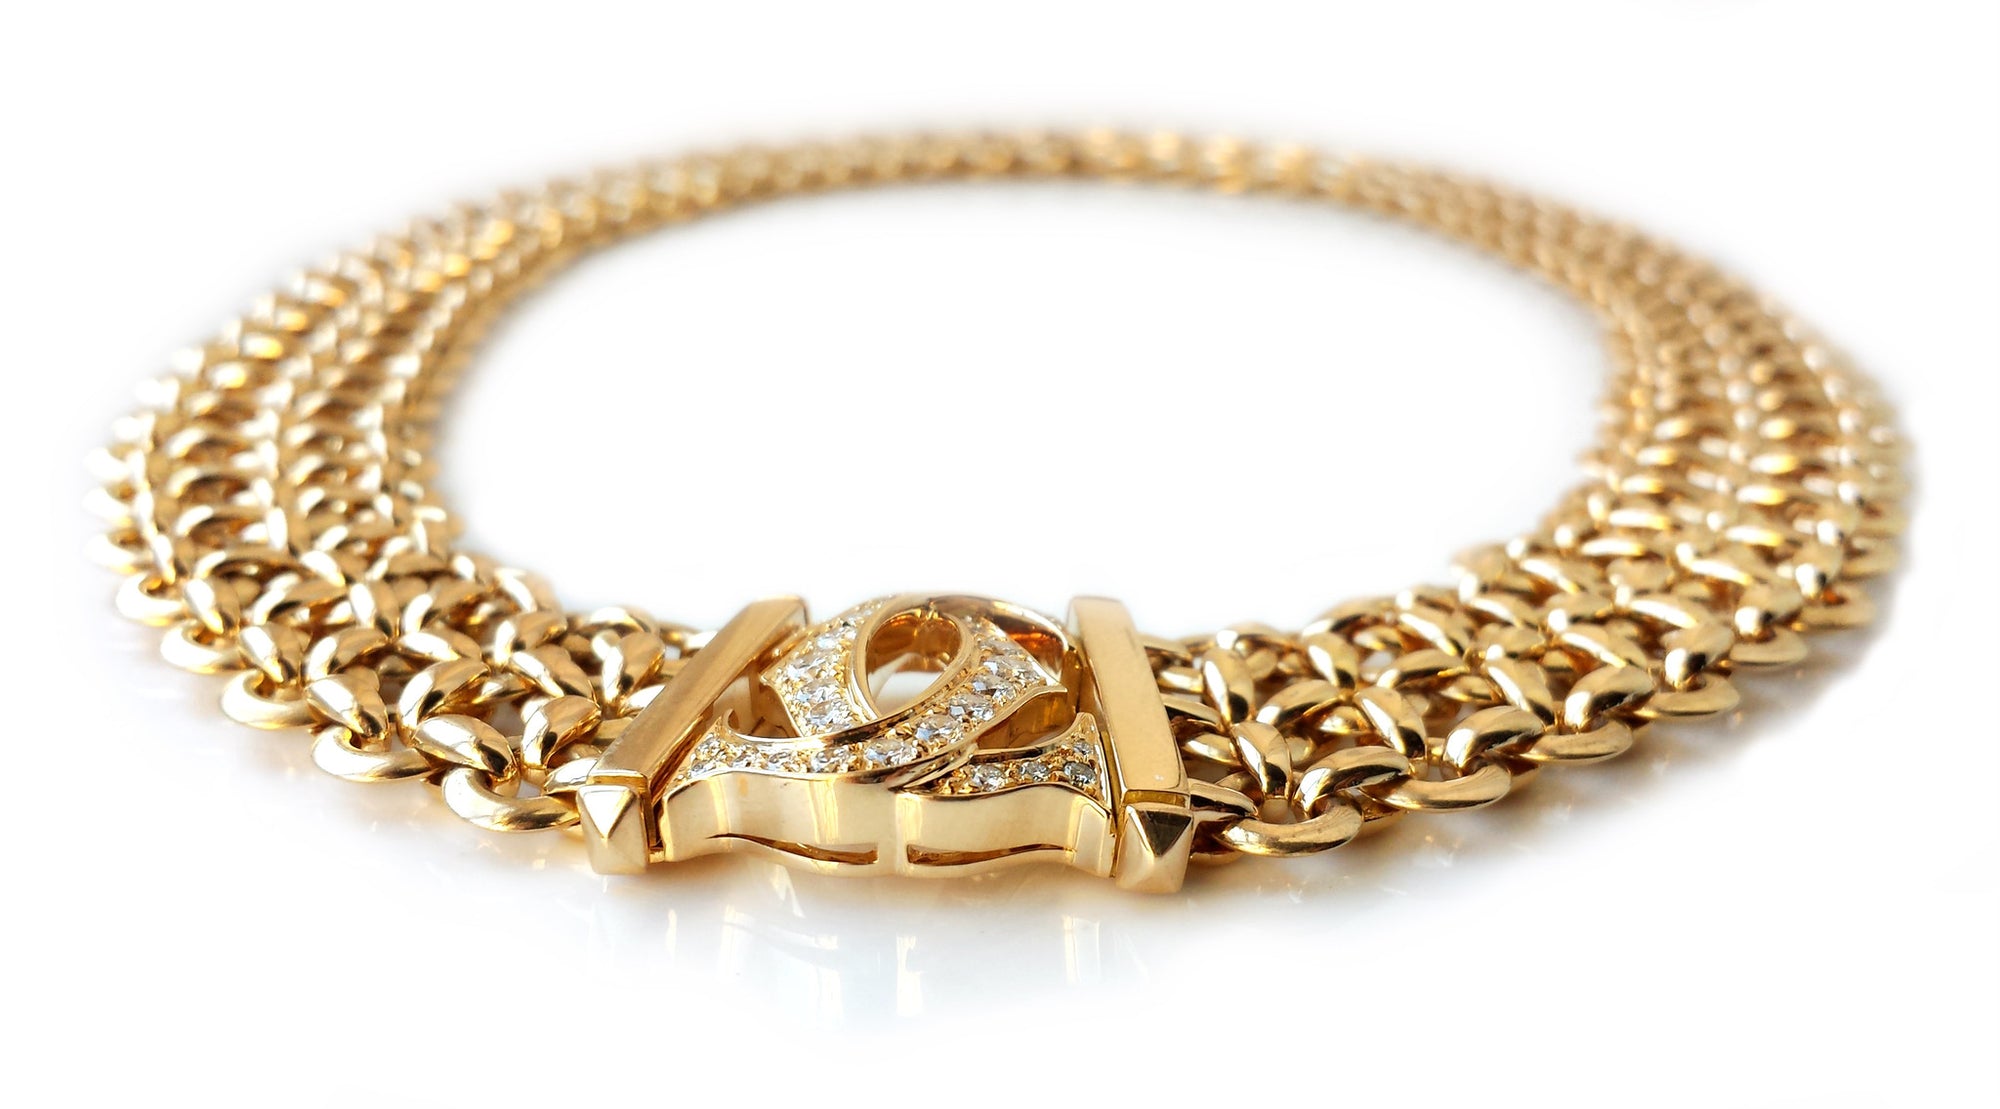 Cartier Penelope 3-row Choker / Necklace in 18k Gold with Diamonds